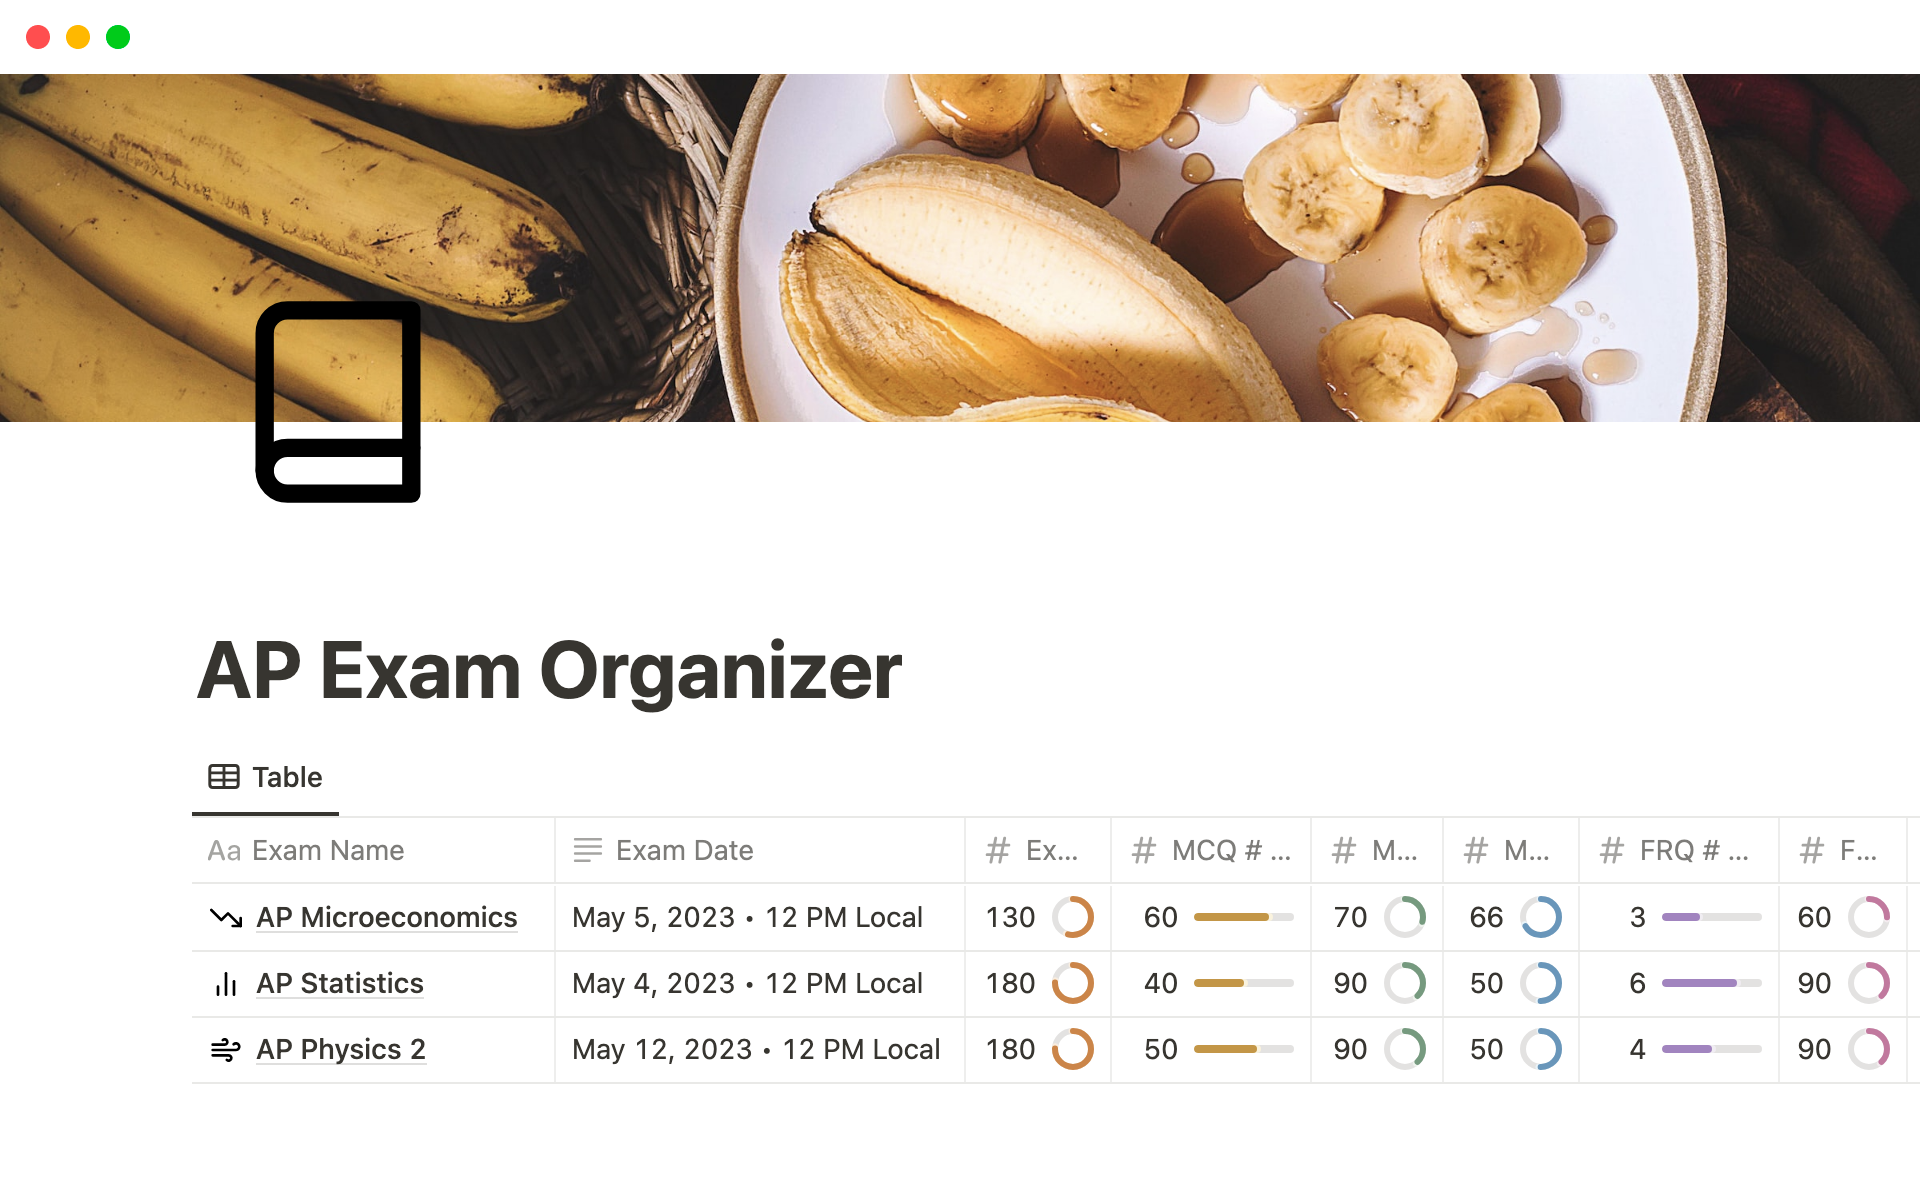 Stay organized by storing all of your AP information and notes in one clean, streamlined database.